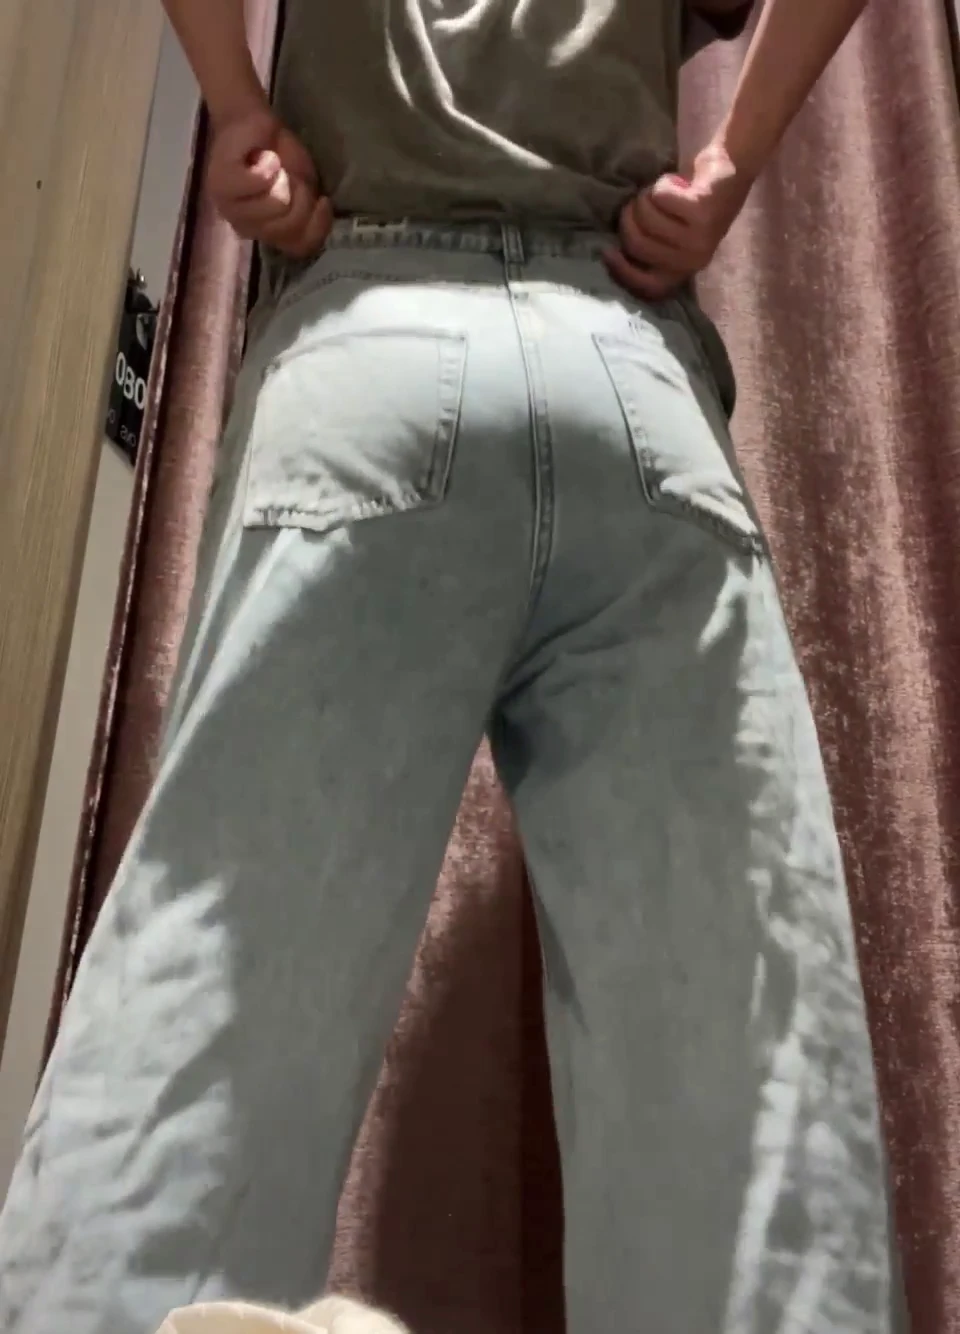 Bubble butt girls struggle, my jeans just can't fit!😠